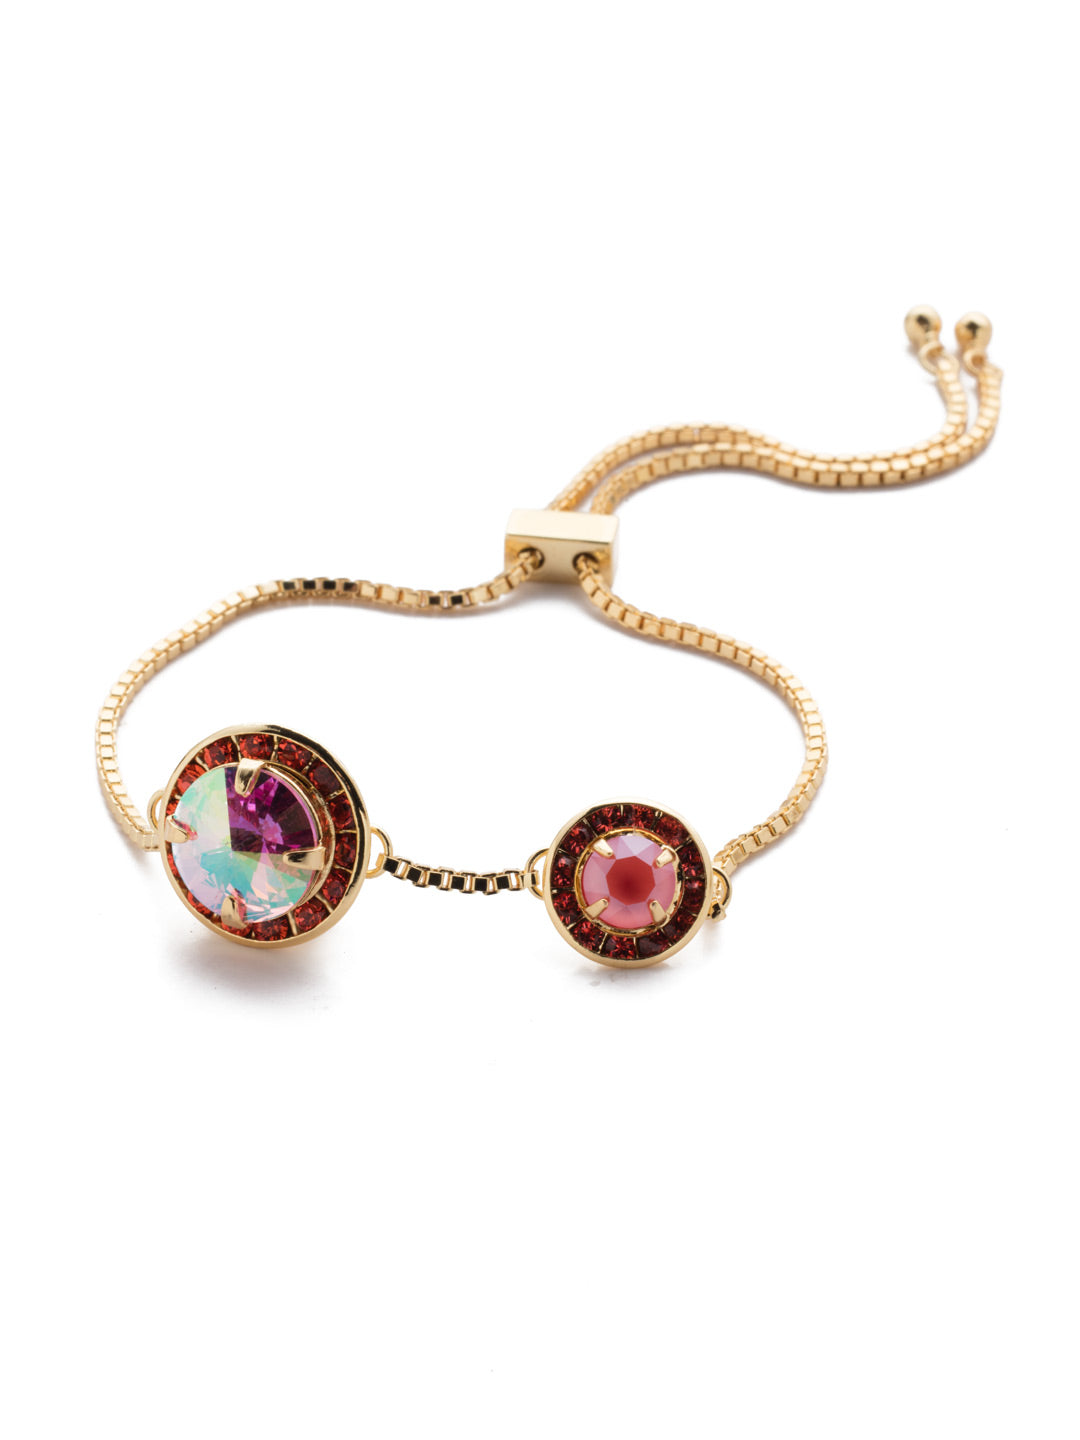 Dua Slider Bracelet - BEA25BGBGA - Sparkling halo crystals connect on a delicate adjustable slider chain. From Sorrelli's Begonia collection in our Bright Gold-tone finish.